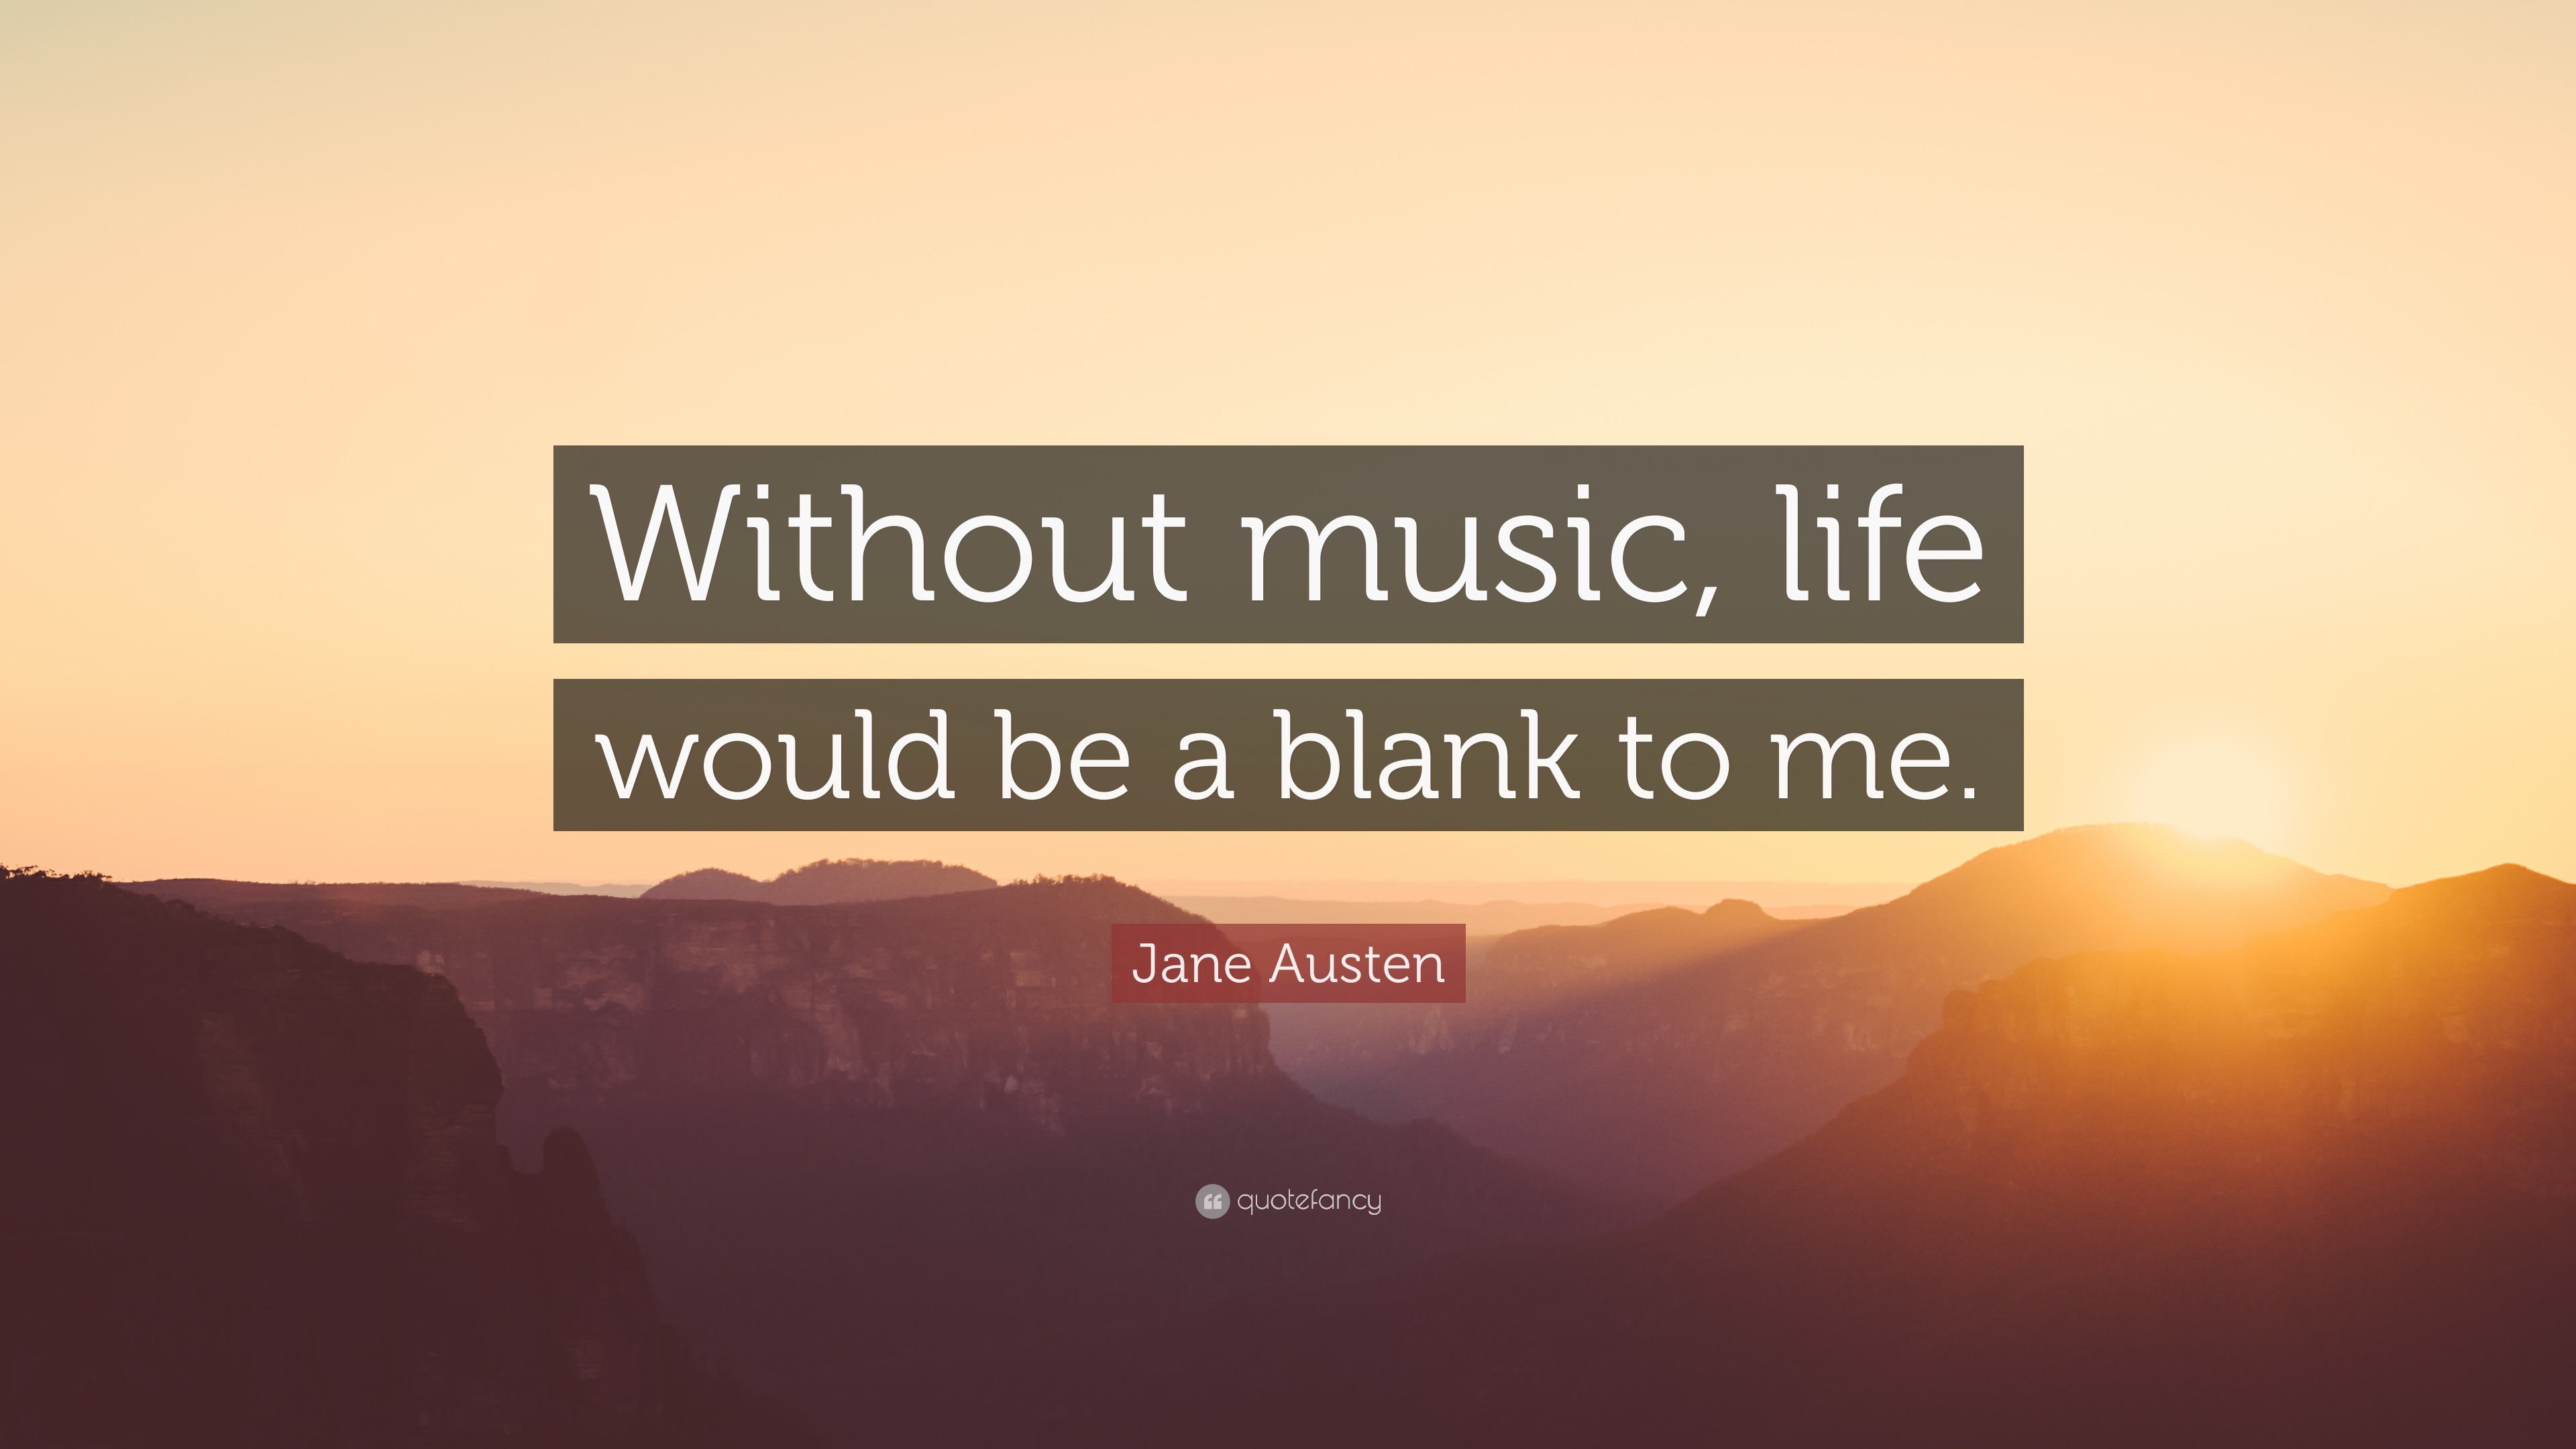 Jane Austen Quote “Without music life would be a blank to me